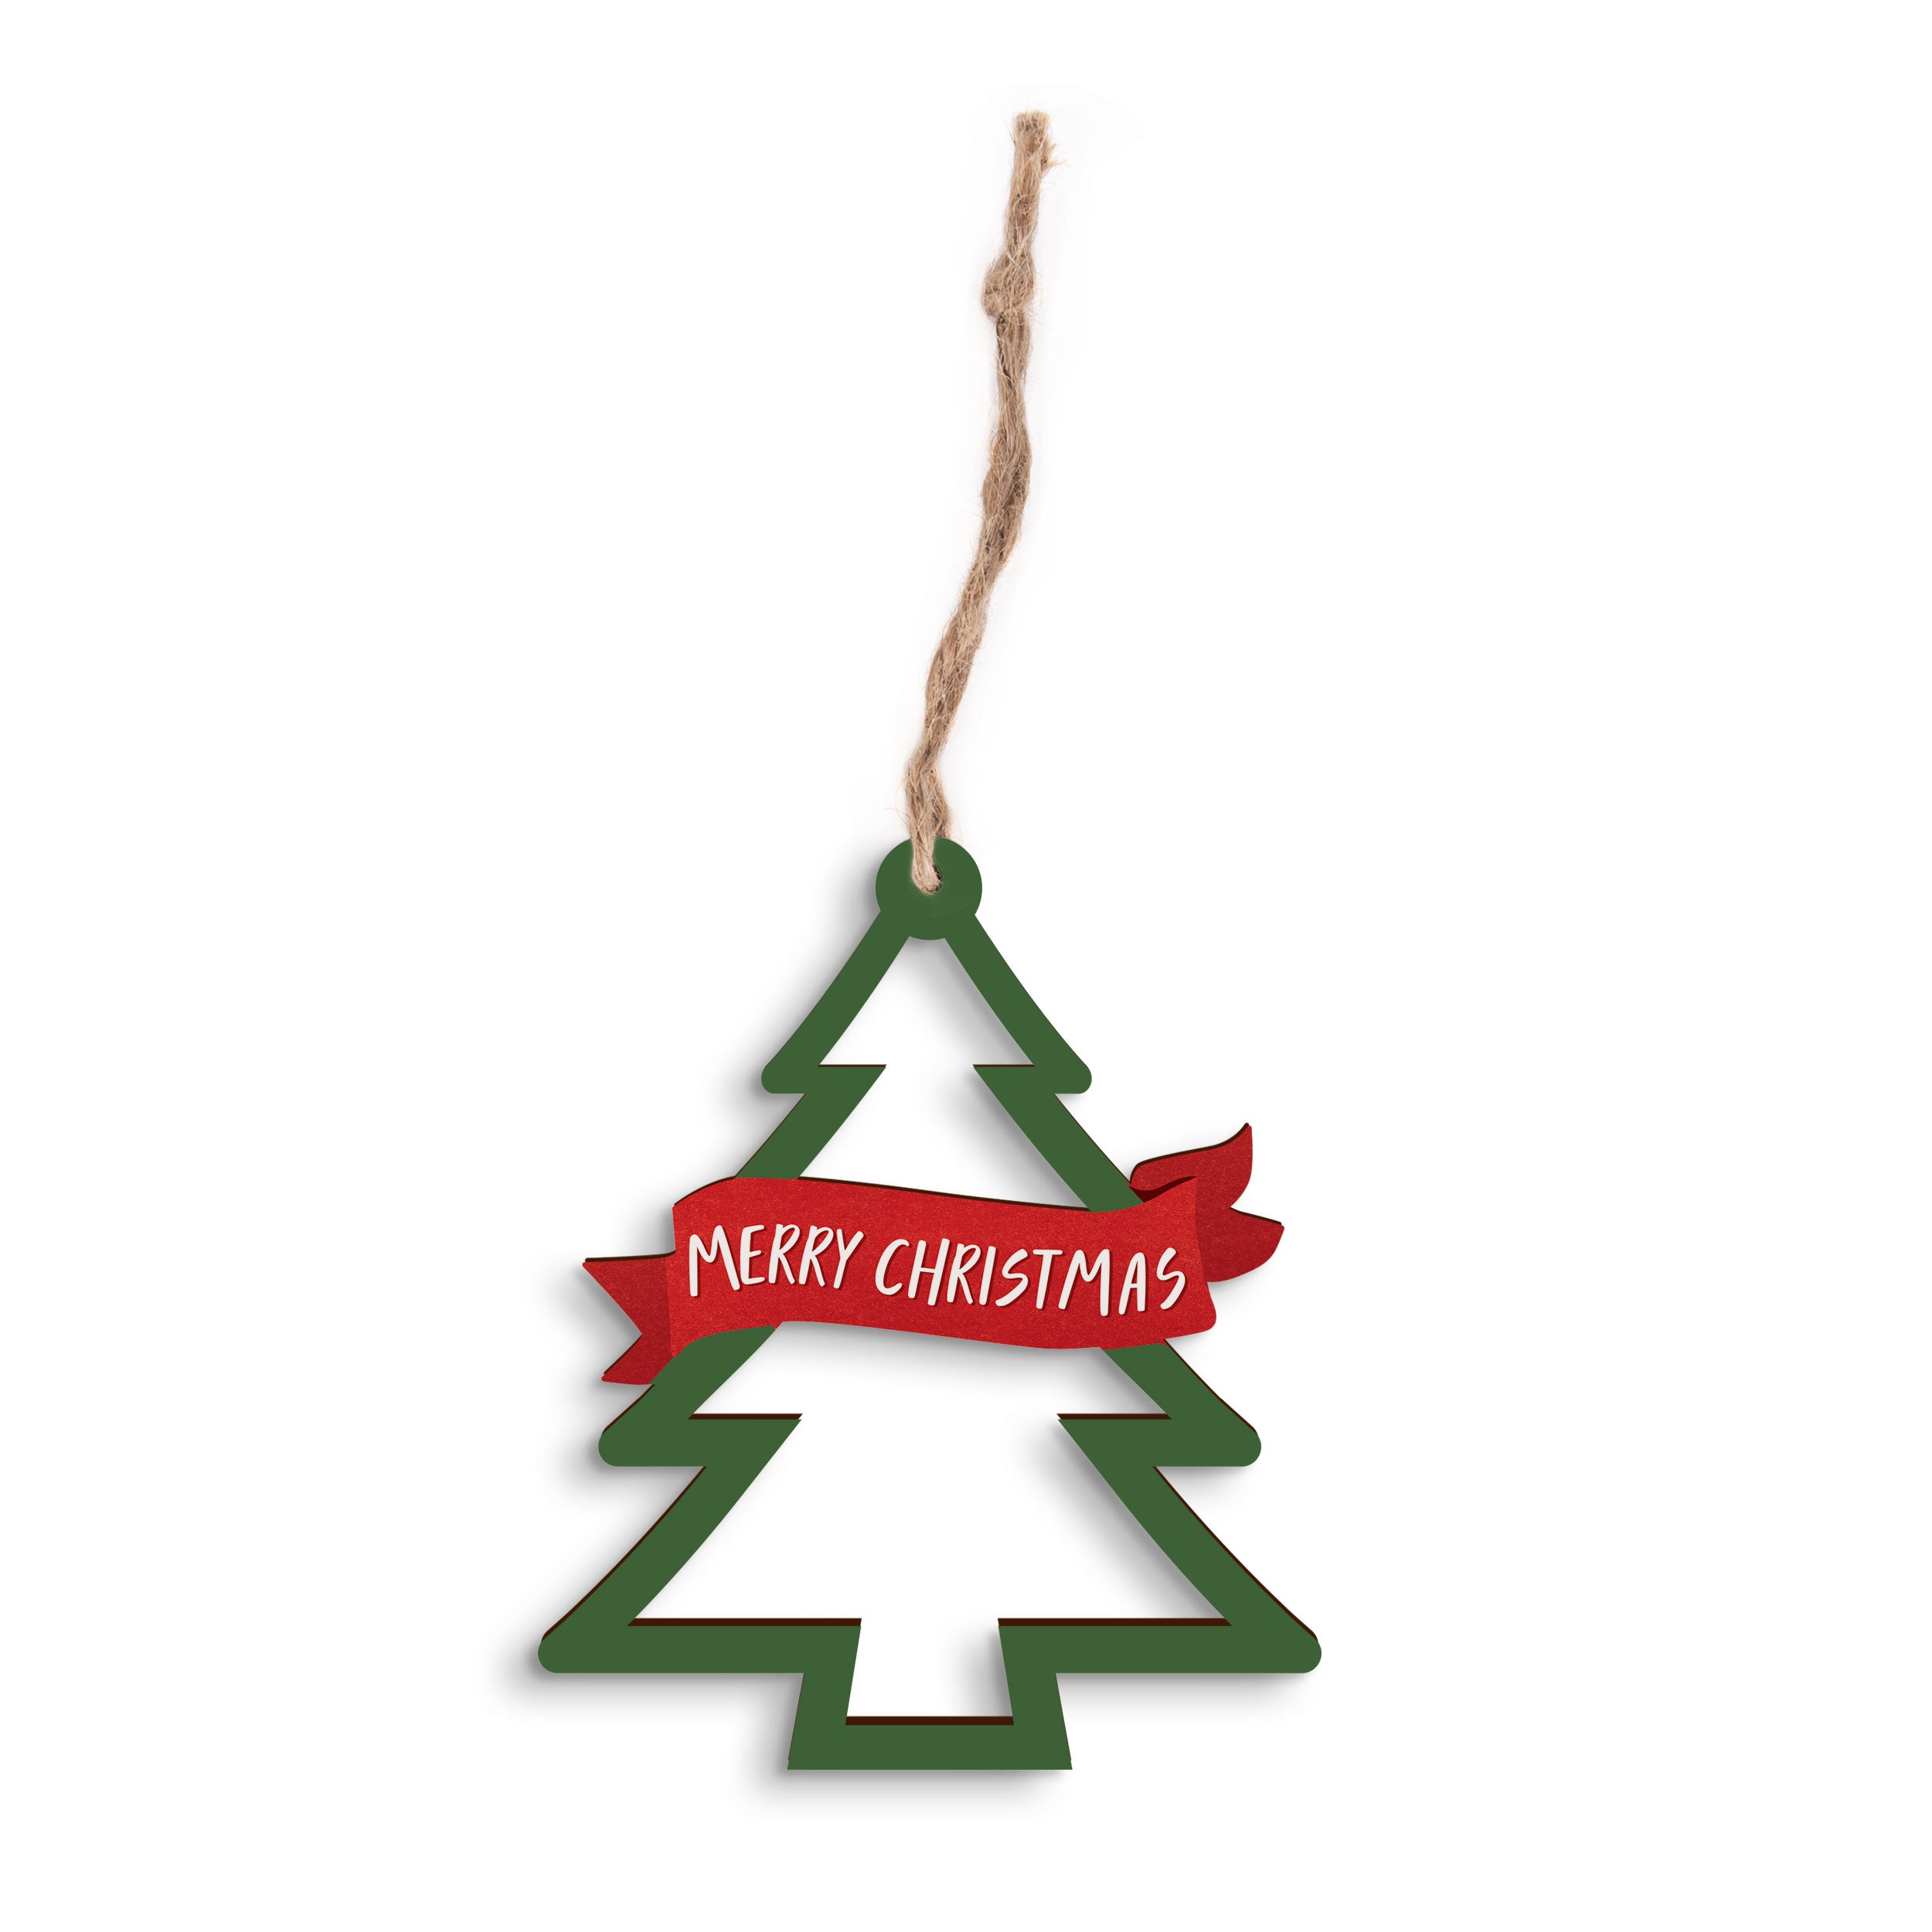 Merry Christmas Cut-Out Ornament